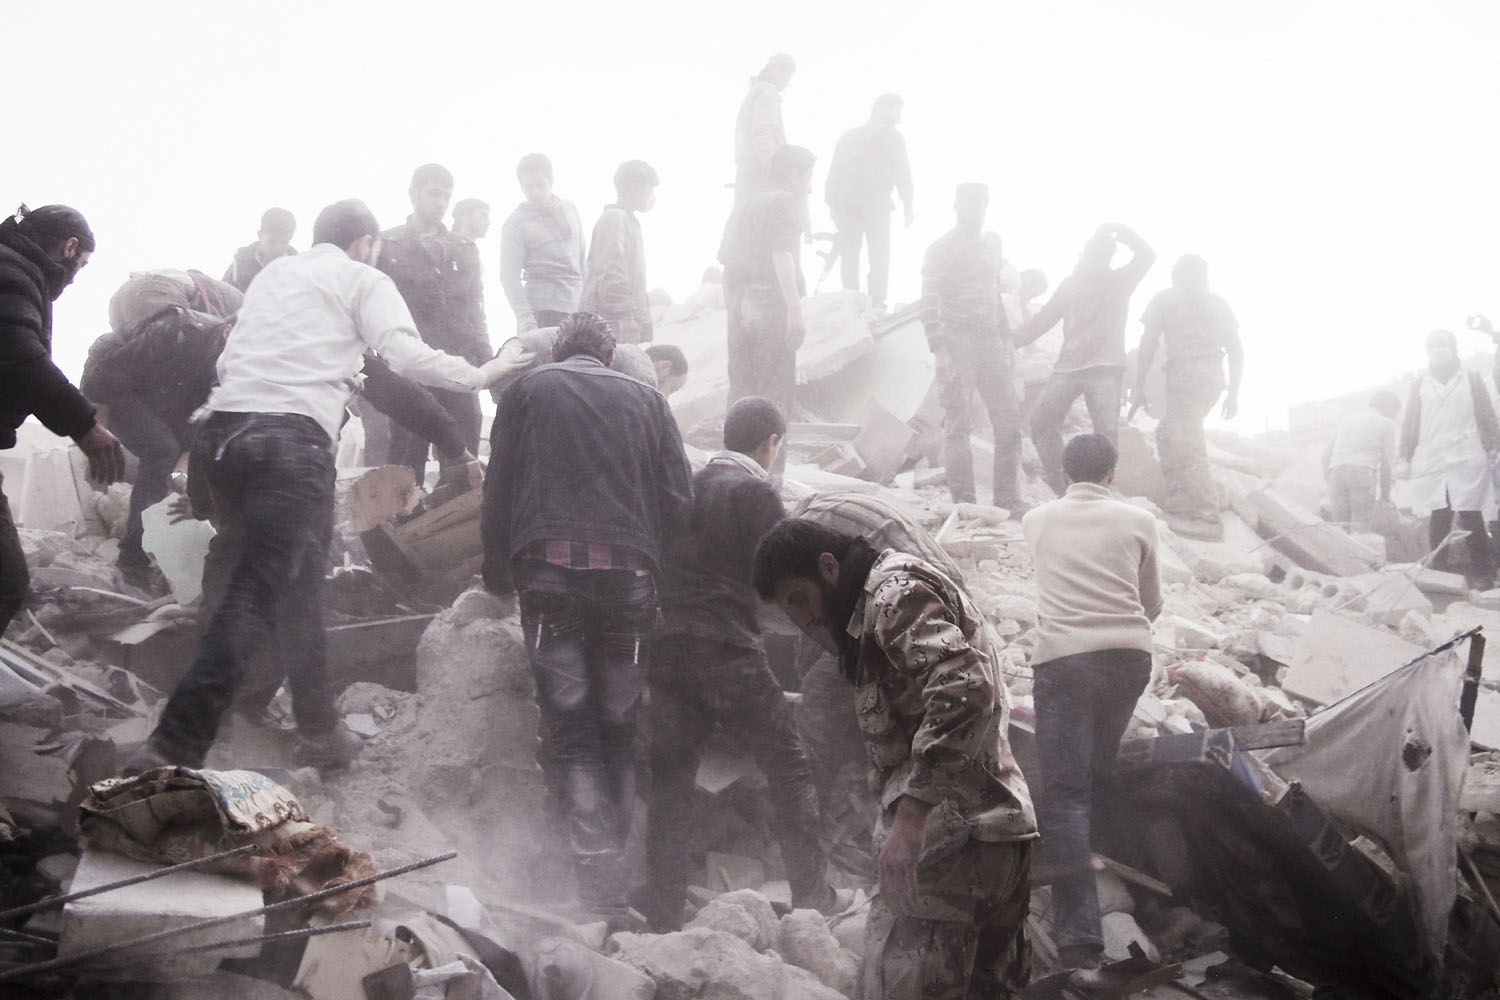 SYRIA. Aleppo. March 19, 2013. Searching for survivors among the rubble of a residential building targeted by a regime airstrike in the rebel-held Al-Sukri district.